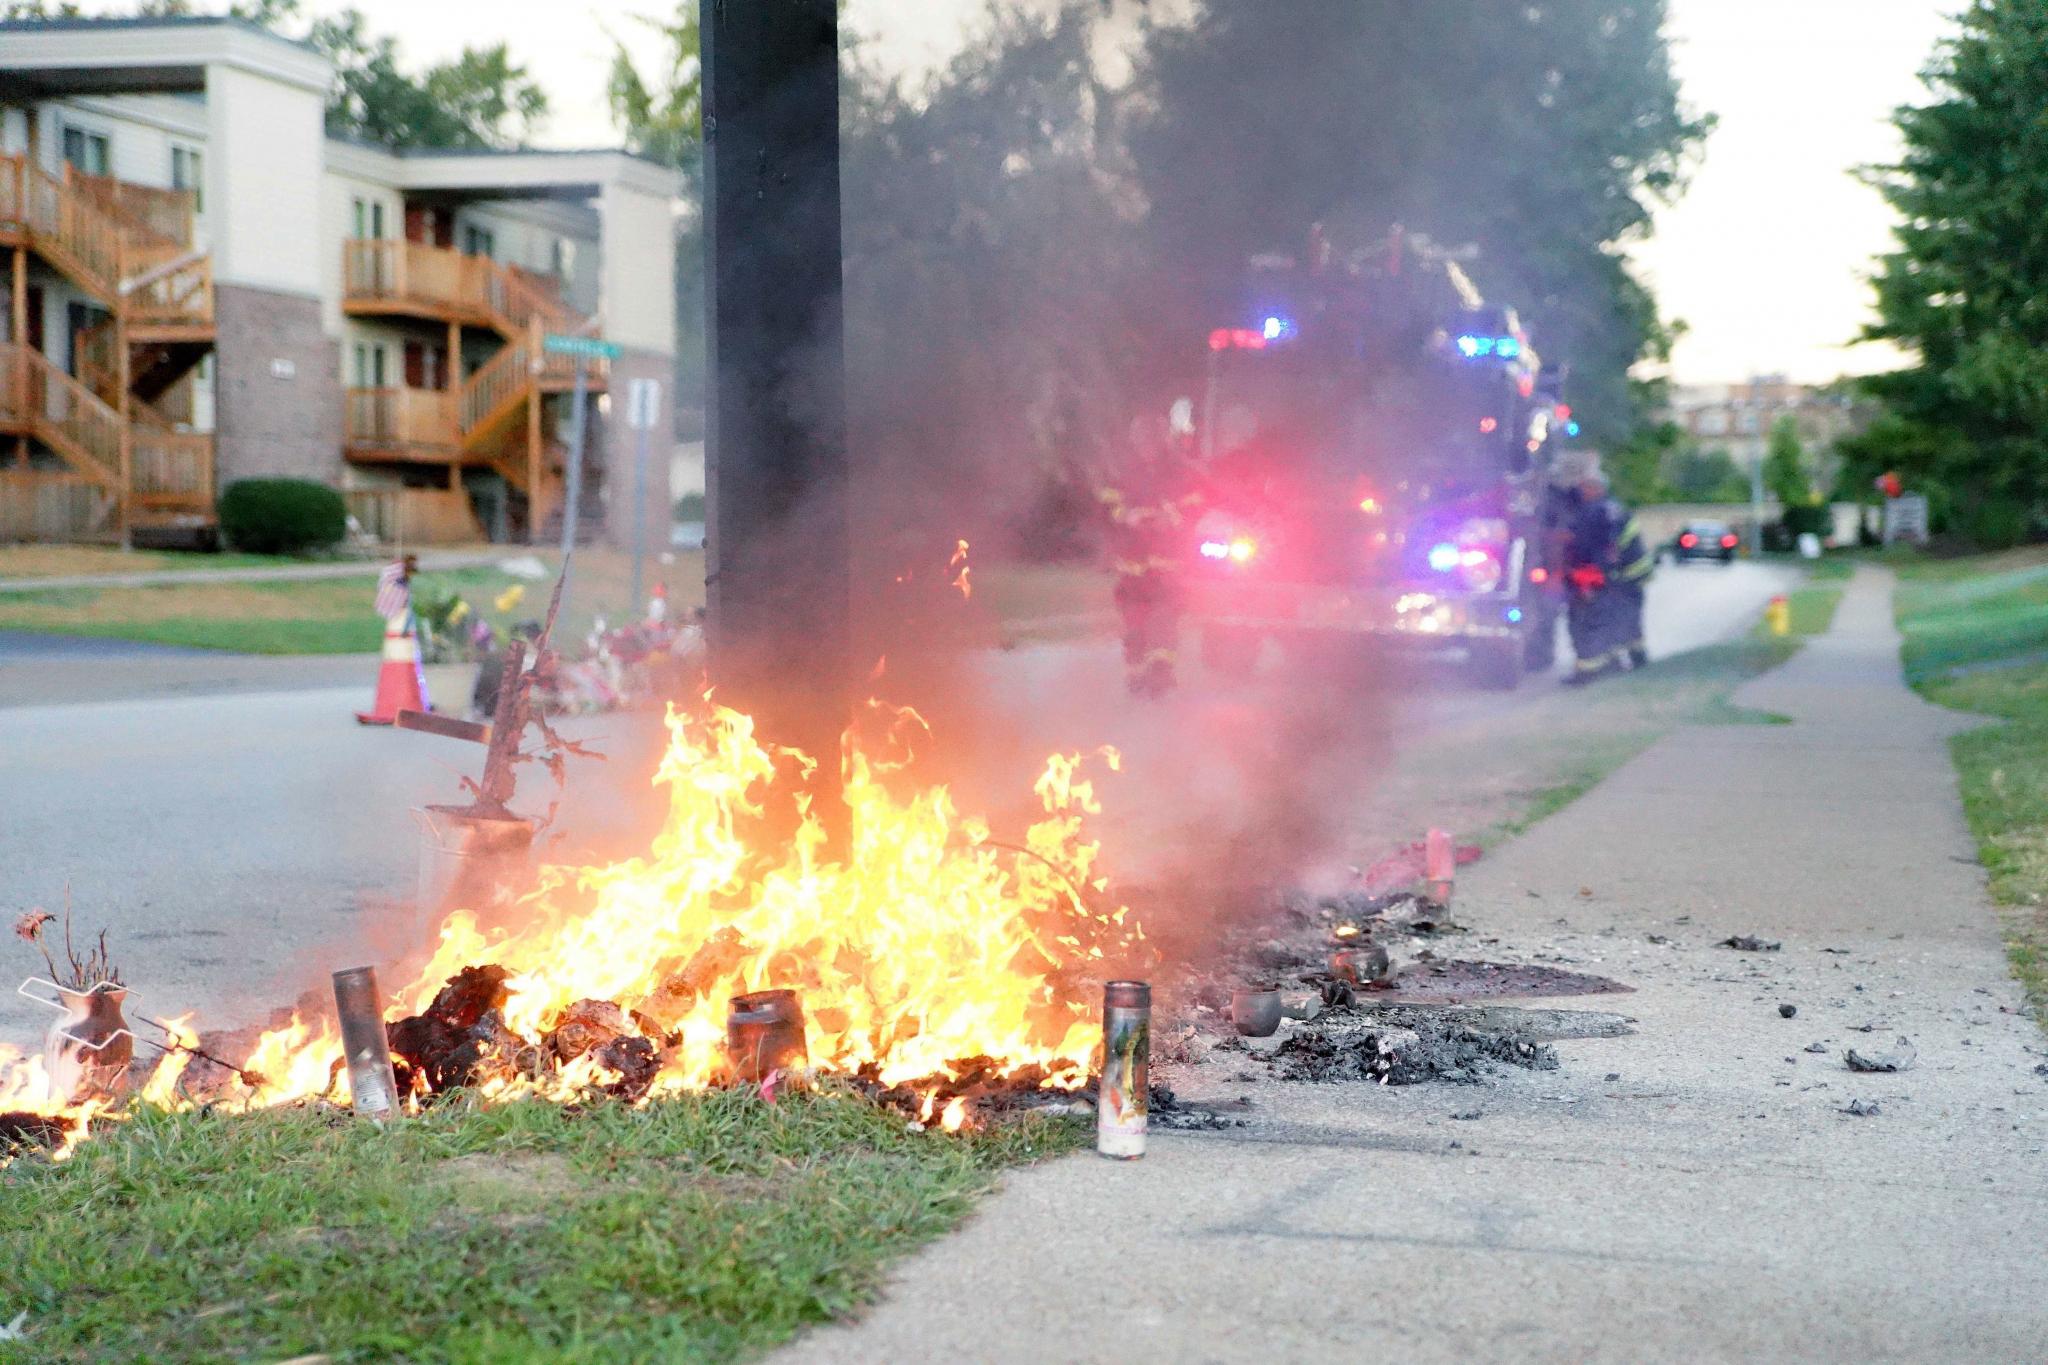 Police Investigating Cause of Fire at Michael Brown Memorial Site